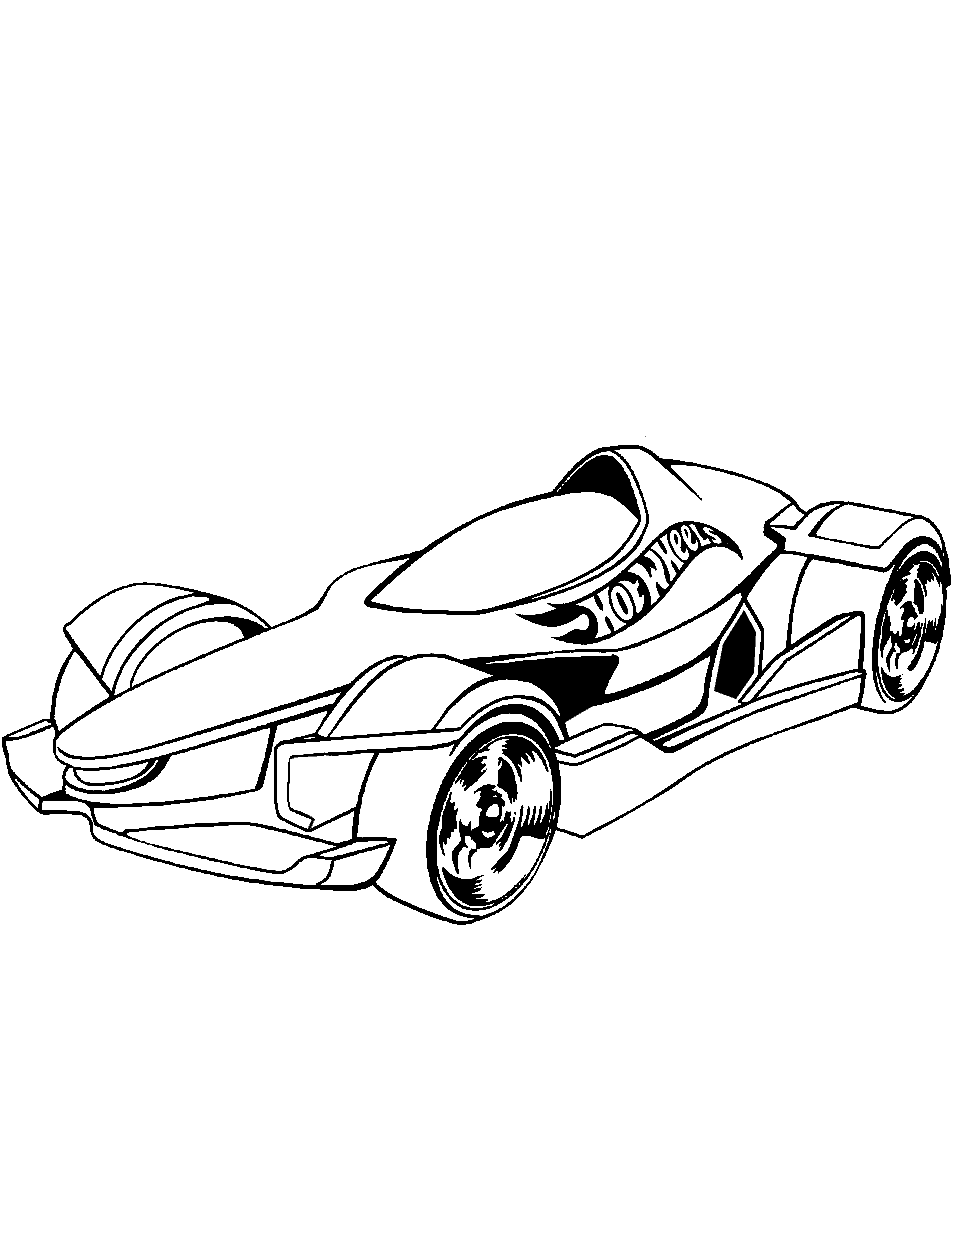 Hot Wheels Hero Race Car Coloring Page - A fantasy race car inspired by the Hot Wheels designs.